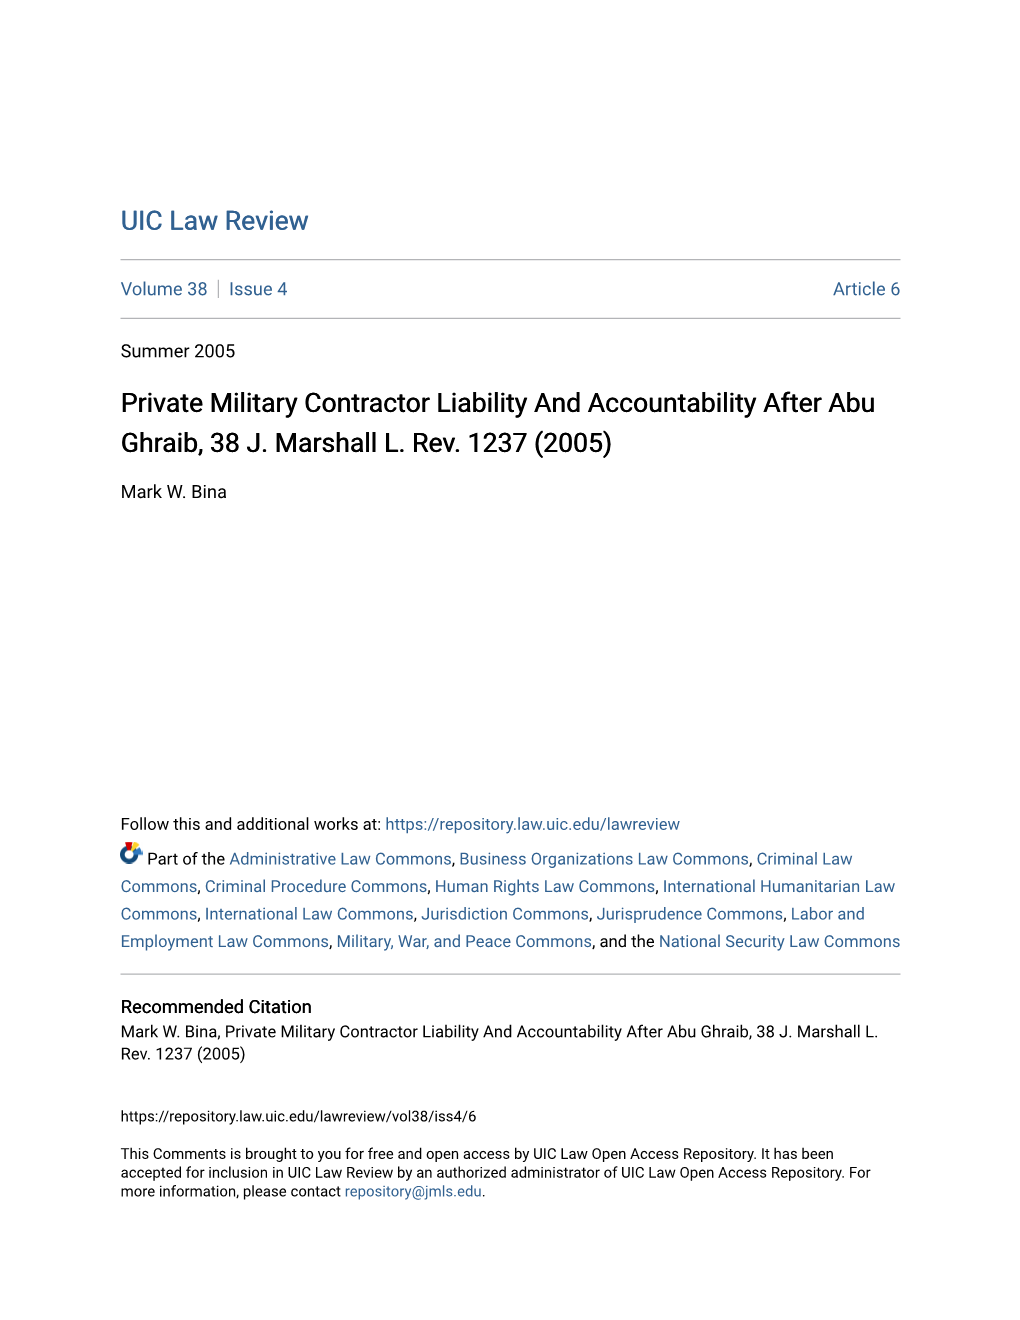 Private Military Contractor Liability and Accountability After Abu Ghraib, 38 J